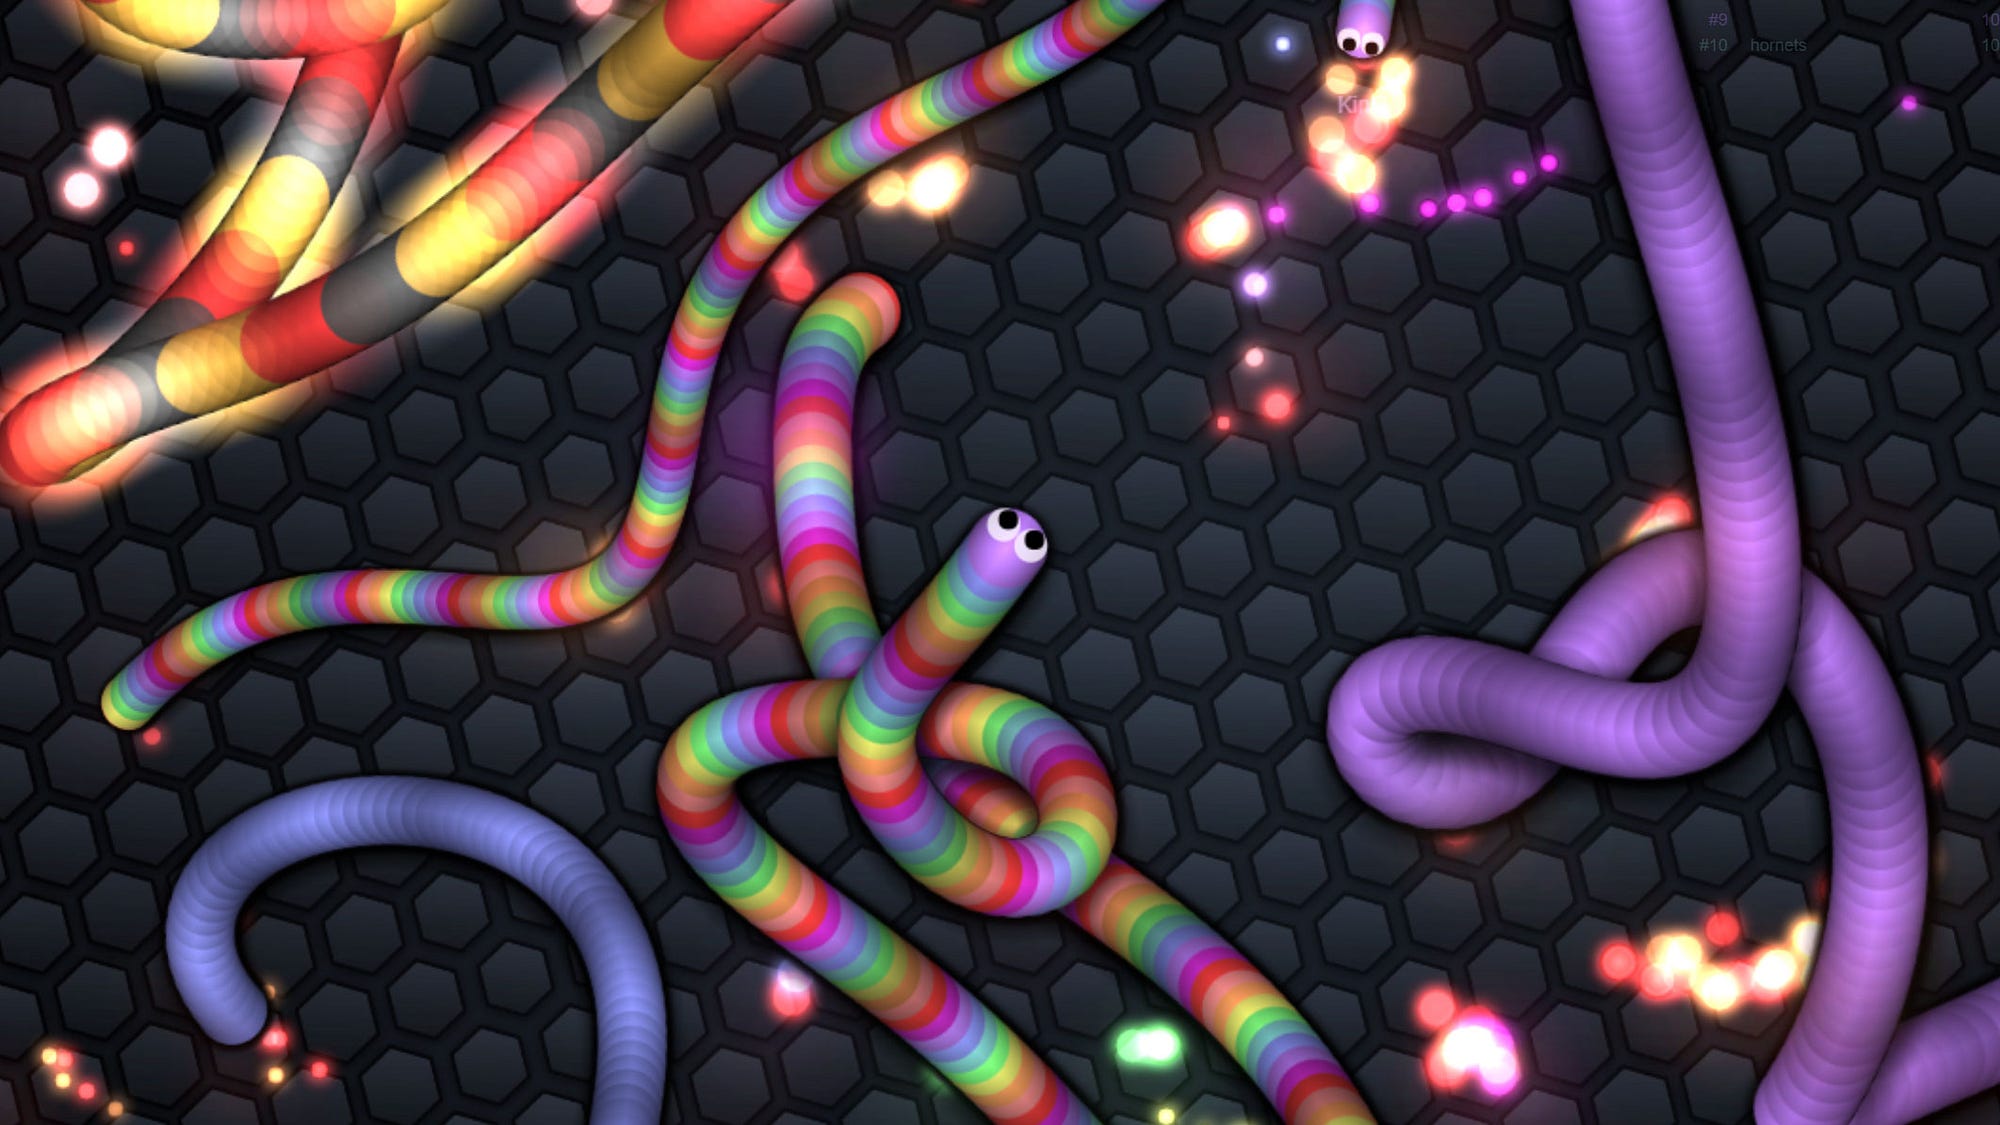 The Hostility Of Slither.io